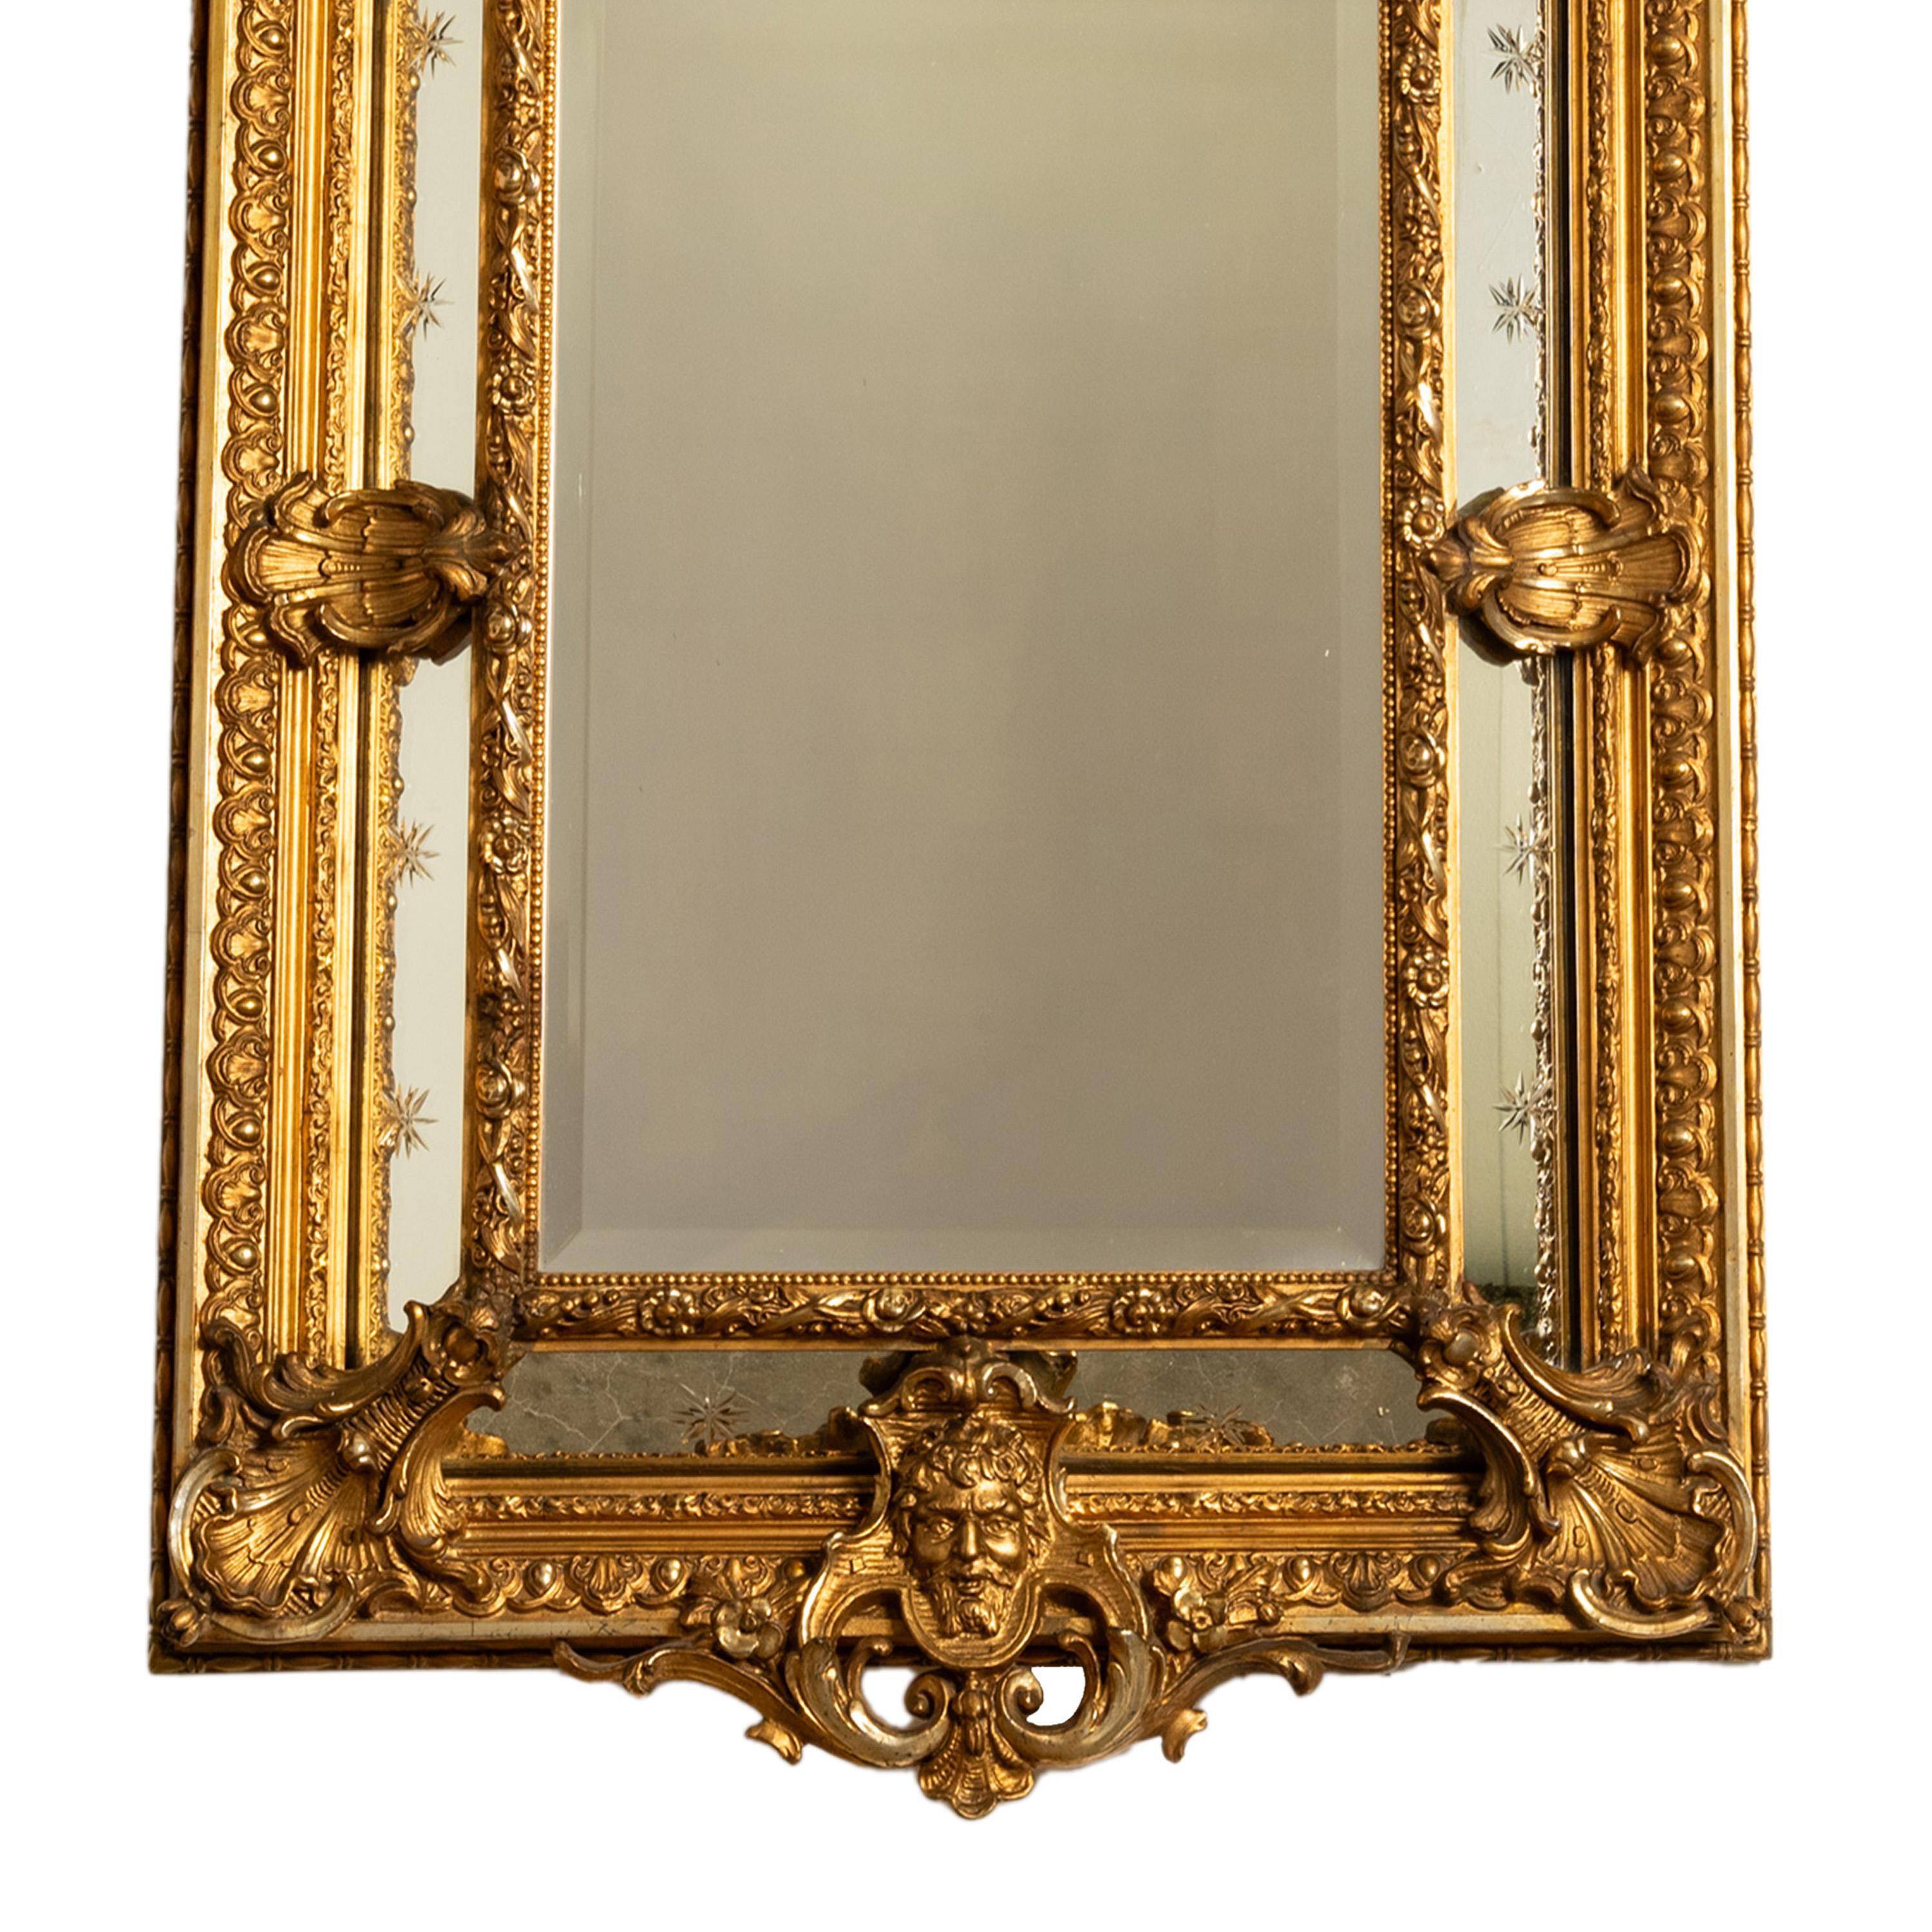 Antique French Giltwood Neoclassical Rococo Mirror Etched Stars Cherubs 1870  In Good Condition For Sale In Portland, OR